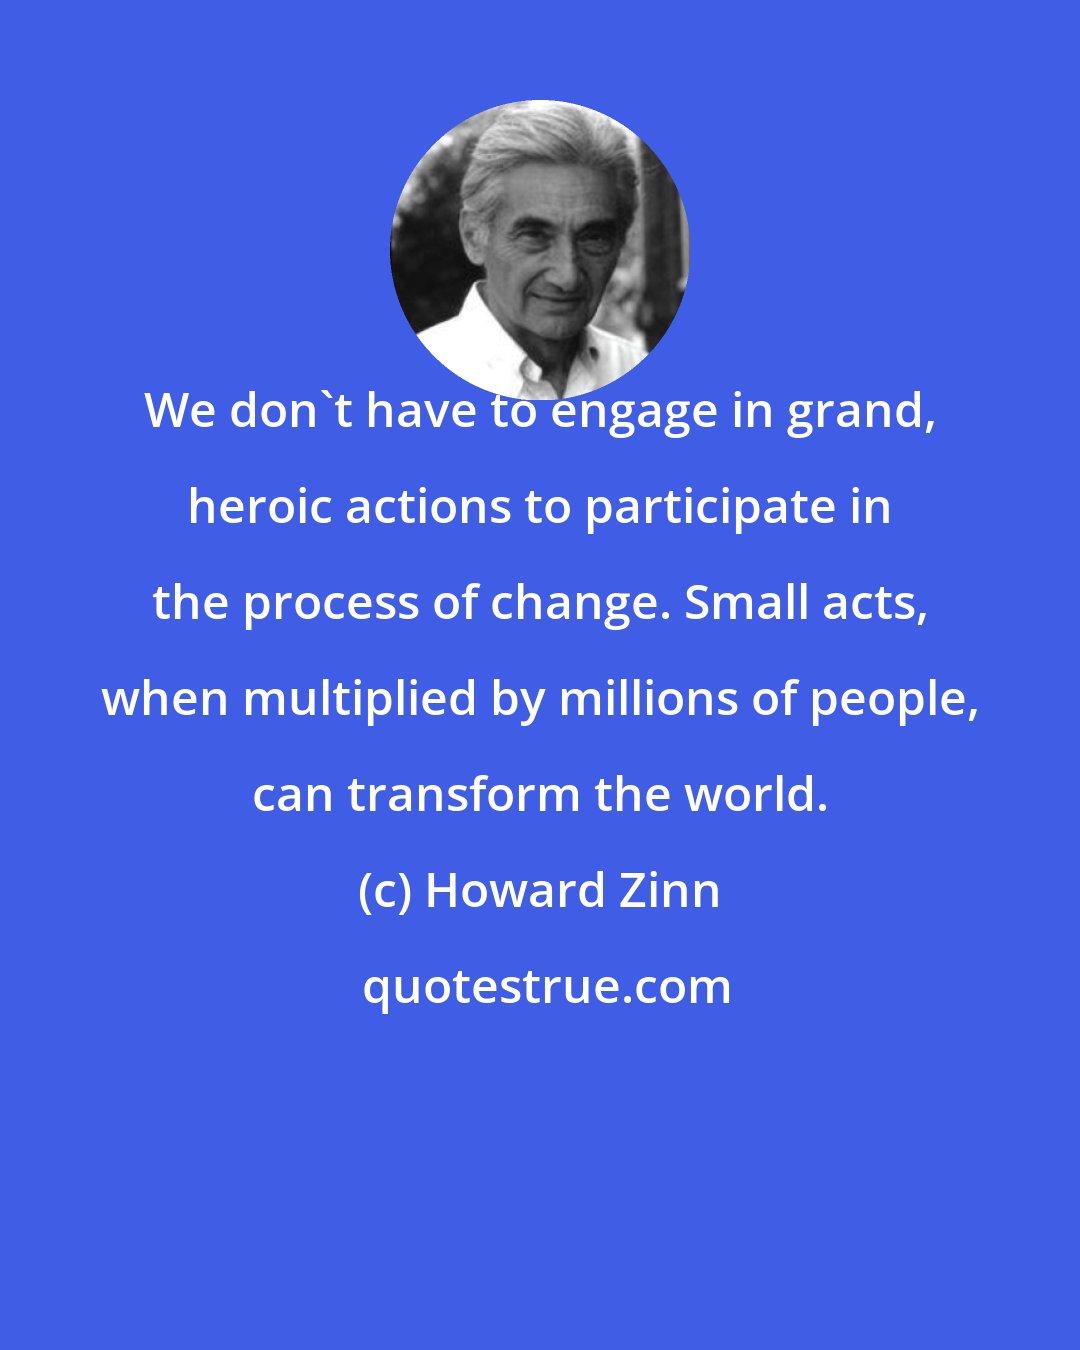 Howard Zinn: We don't have to engage in grand, heroic actions to participate in the process of change. Small acts, when multiplied by millions of people, can transform the world.